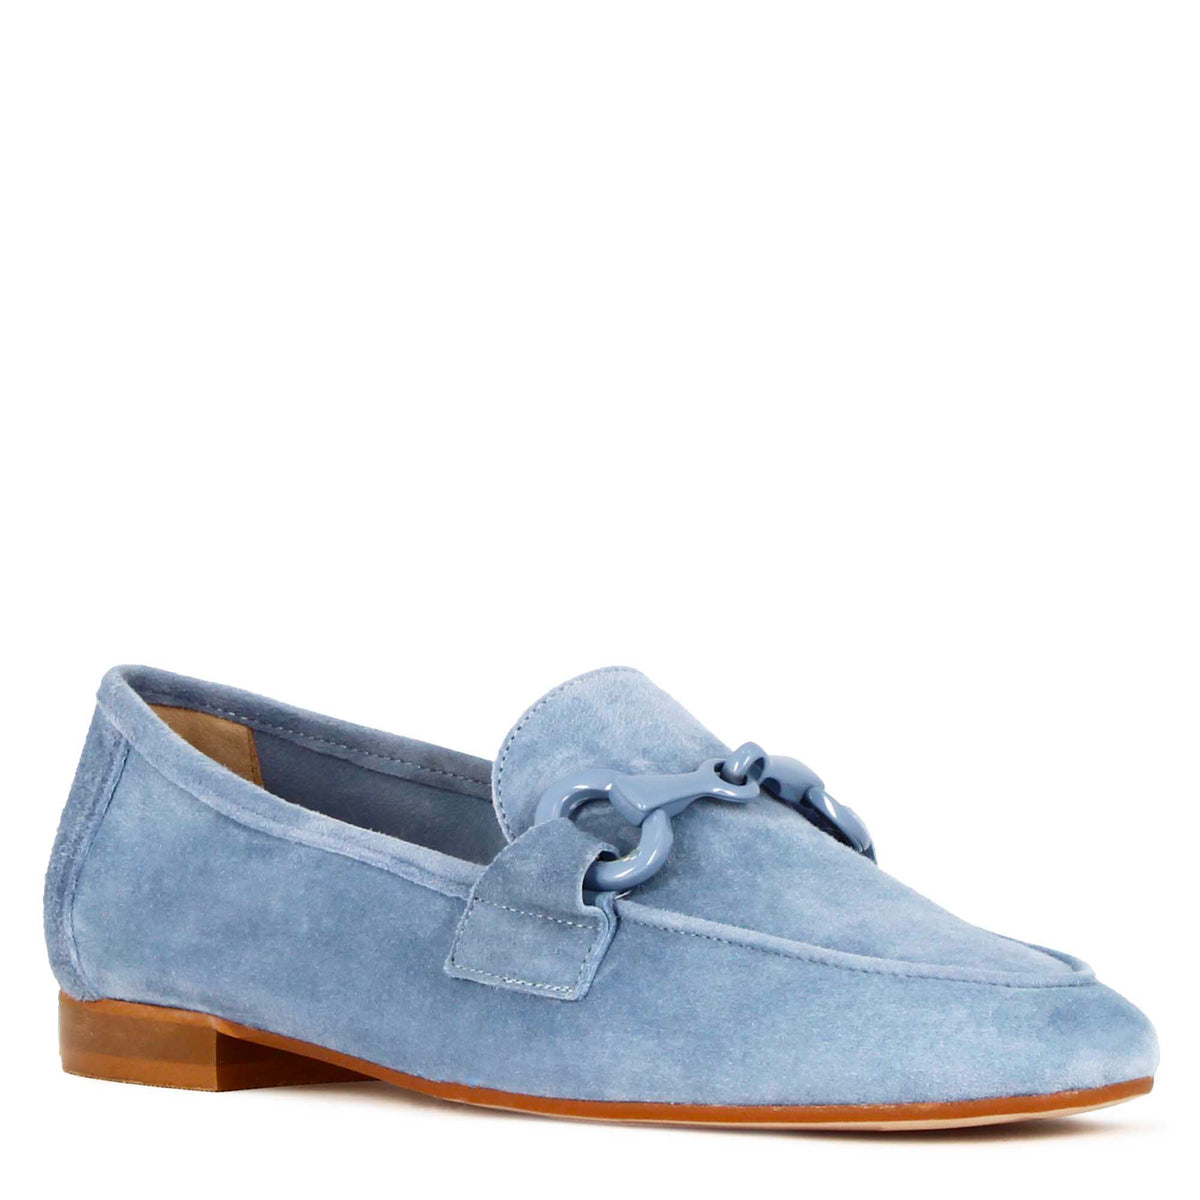 Women's suede moccasin with turquoise horsebit